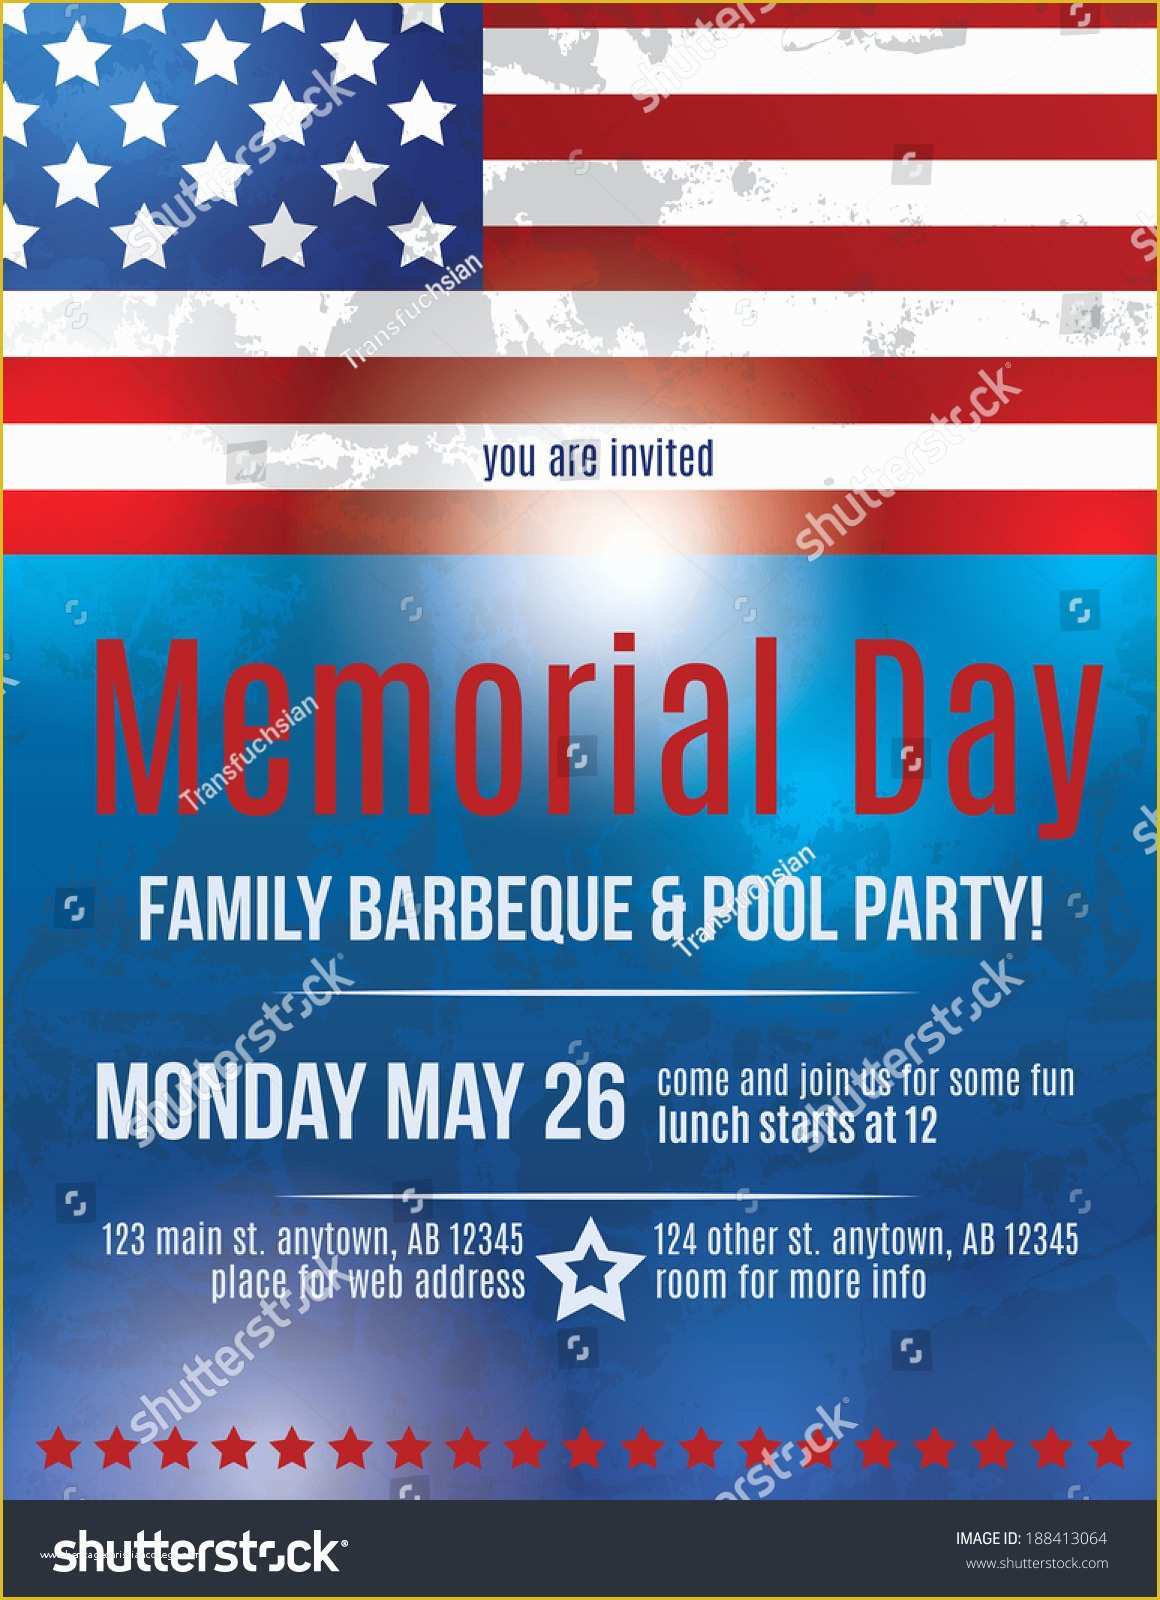 Free Patriotic Flyer Template Of Memorial Day Barbeque Flyer Background Template with